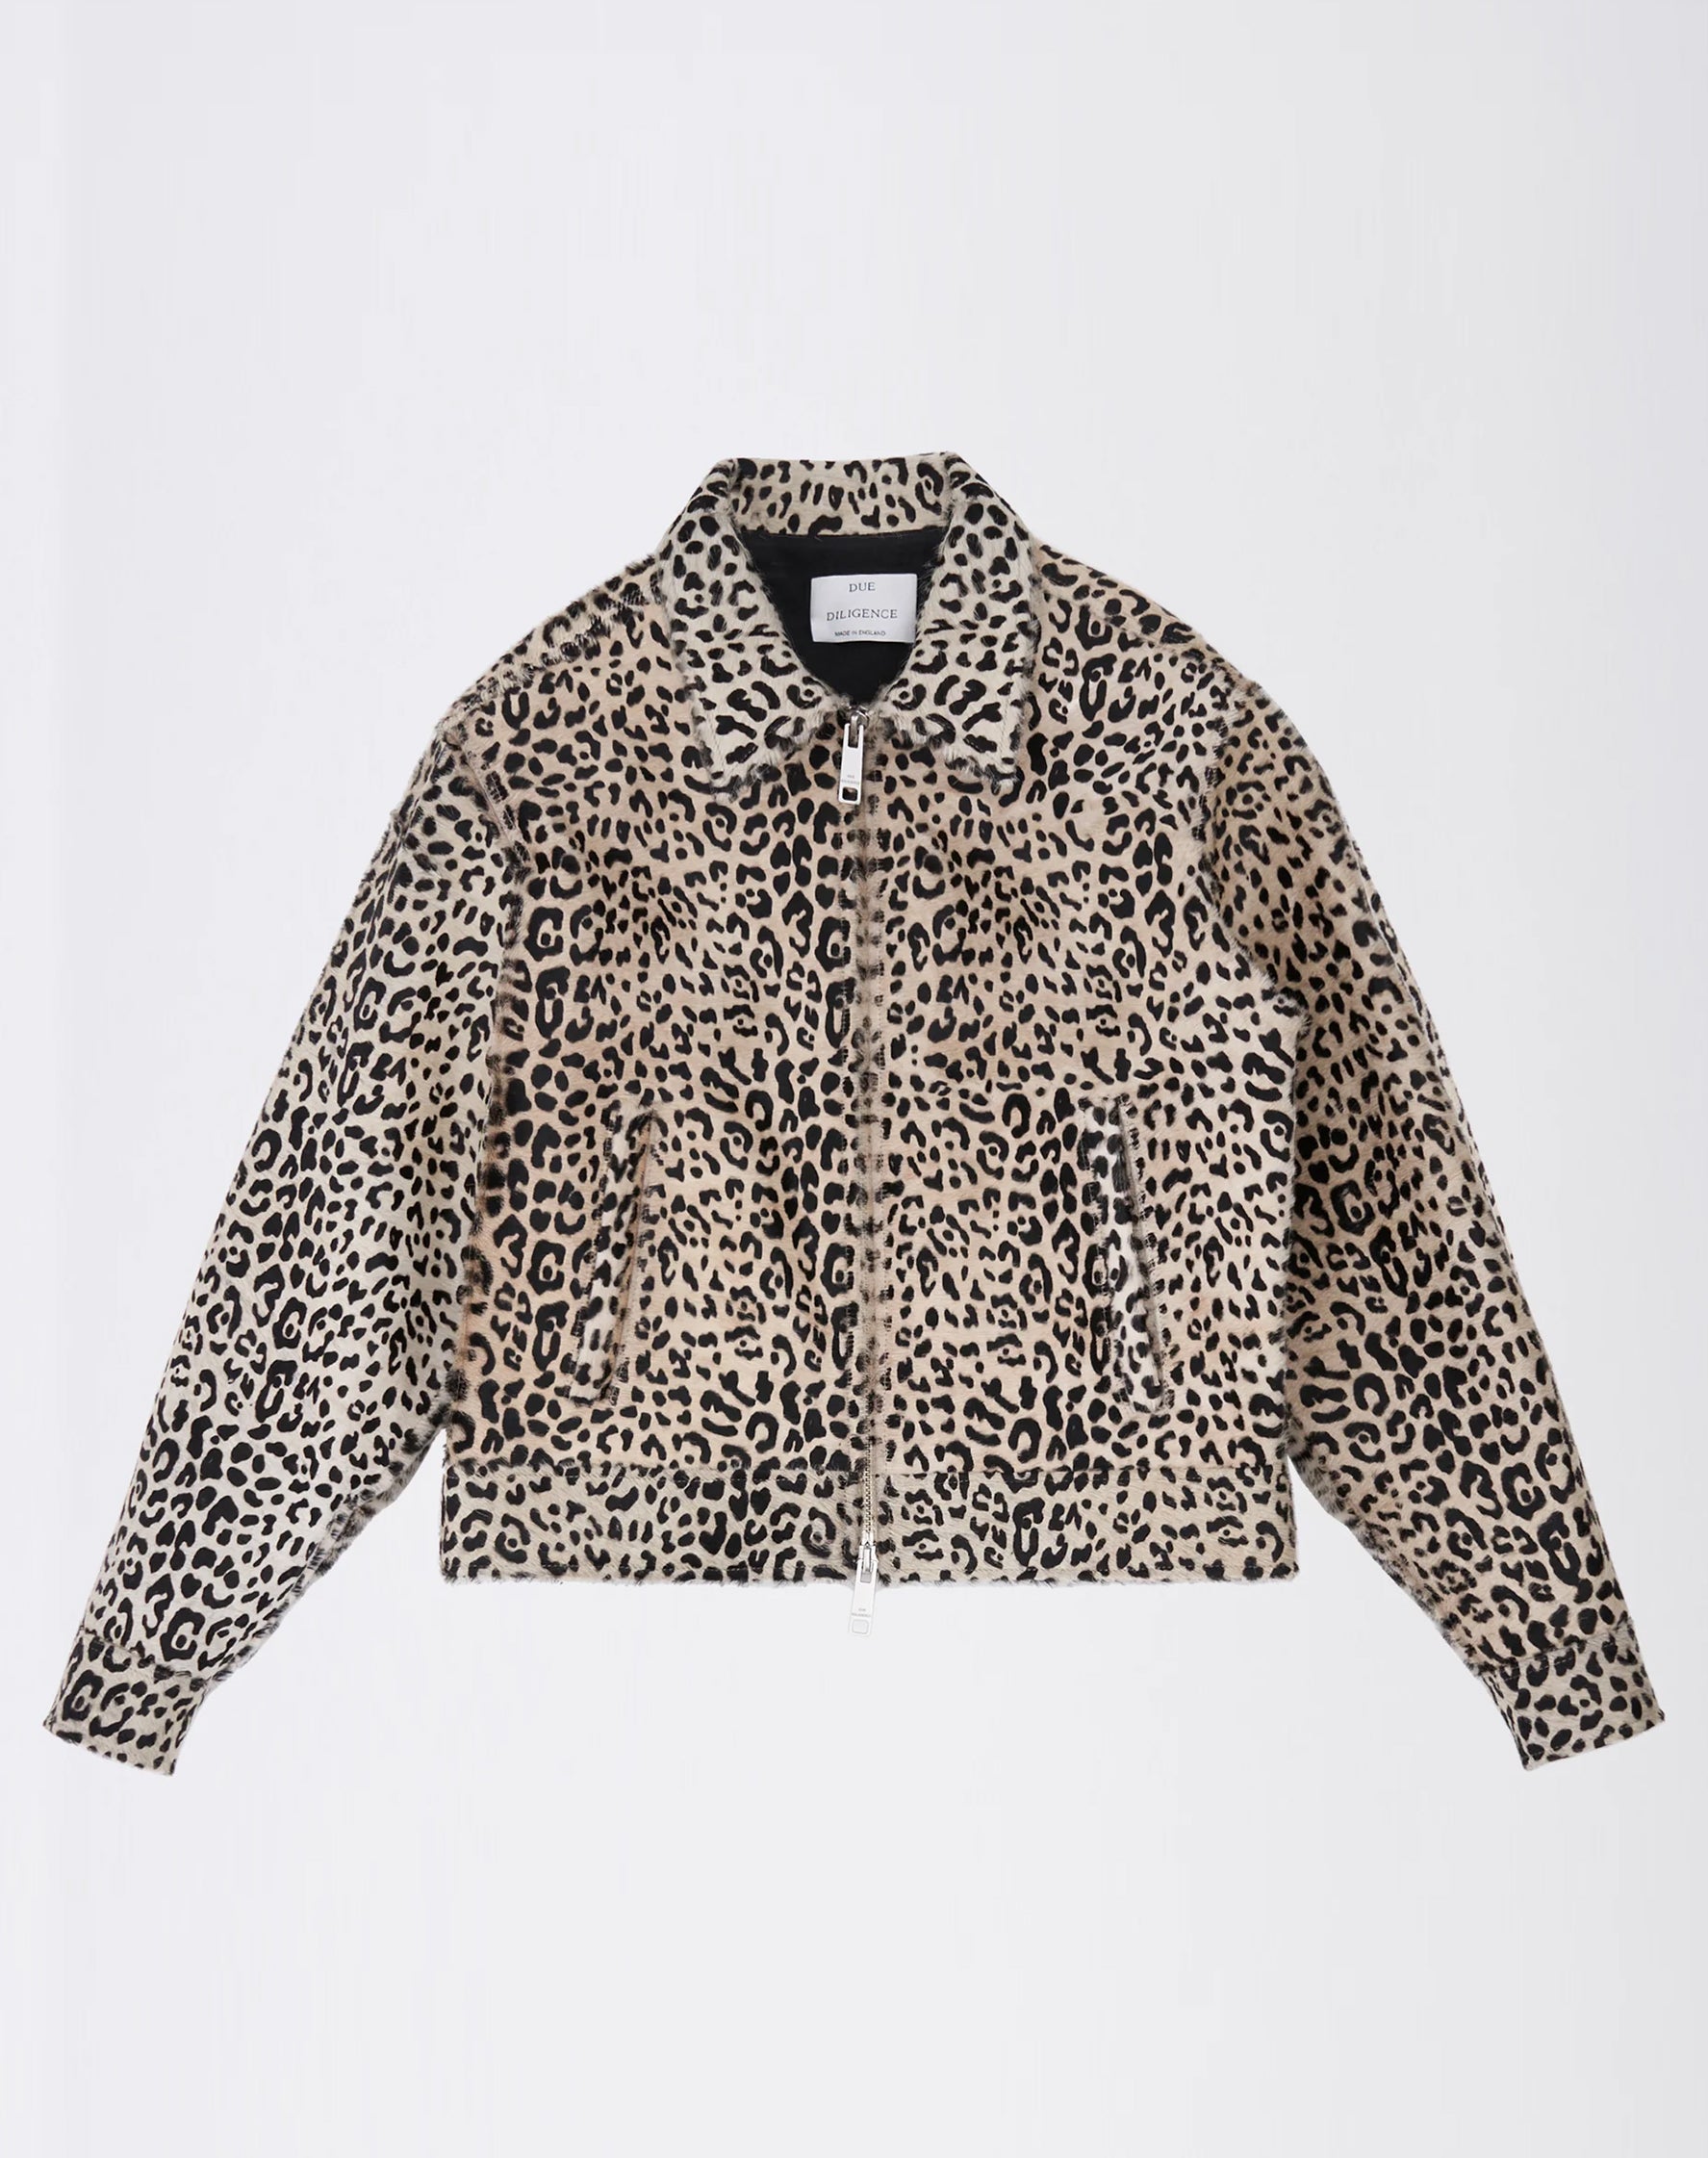 Leopard Print Cow Hair Leather Trucker Jacket - Due Diligence Apparel